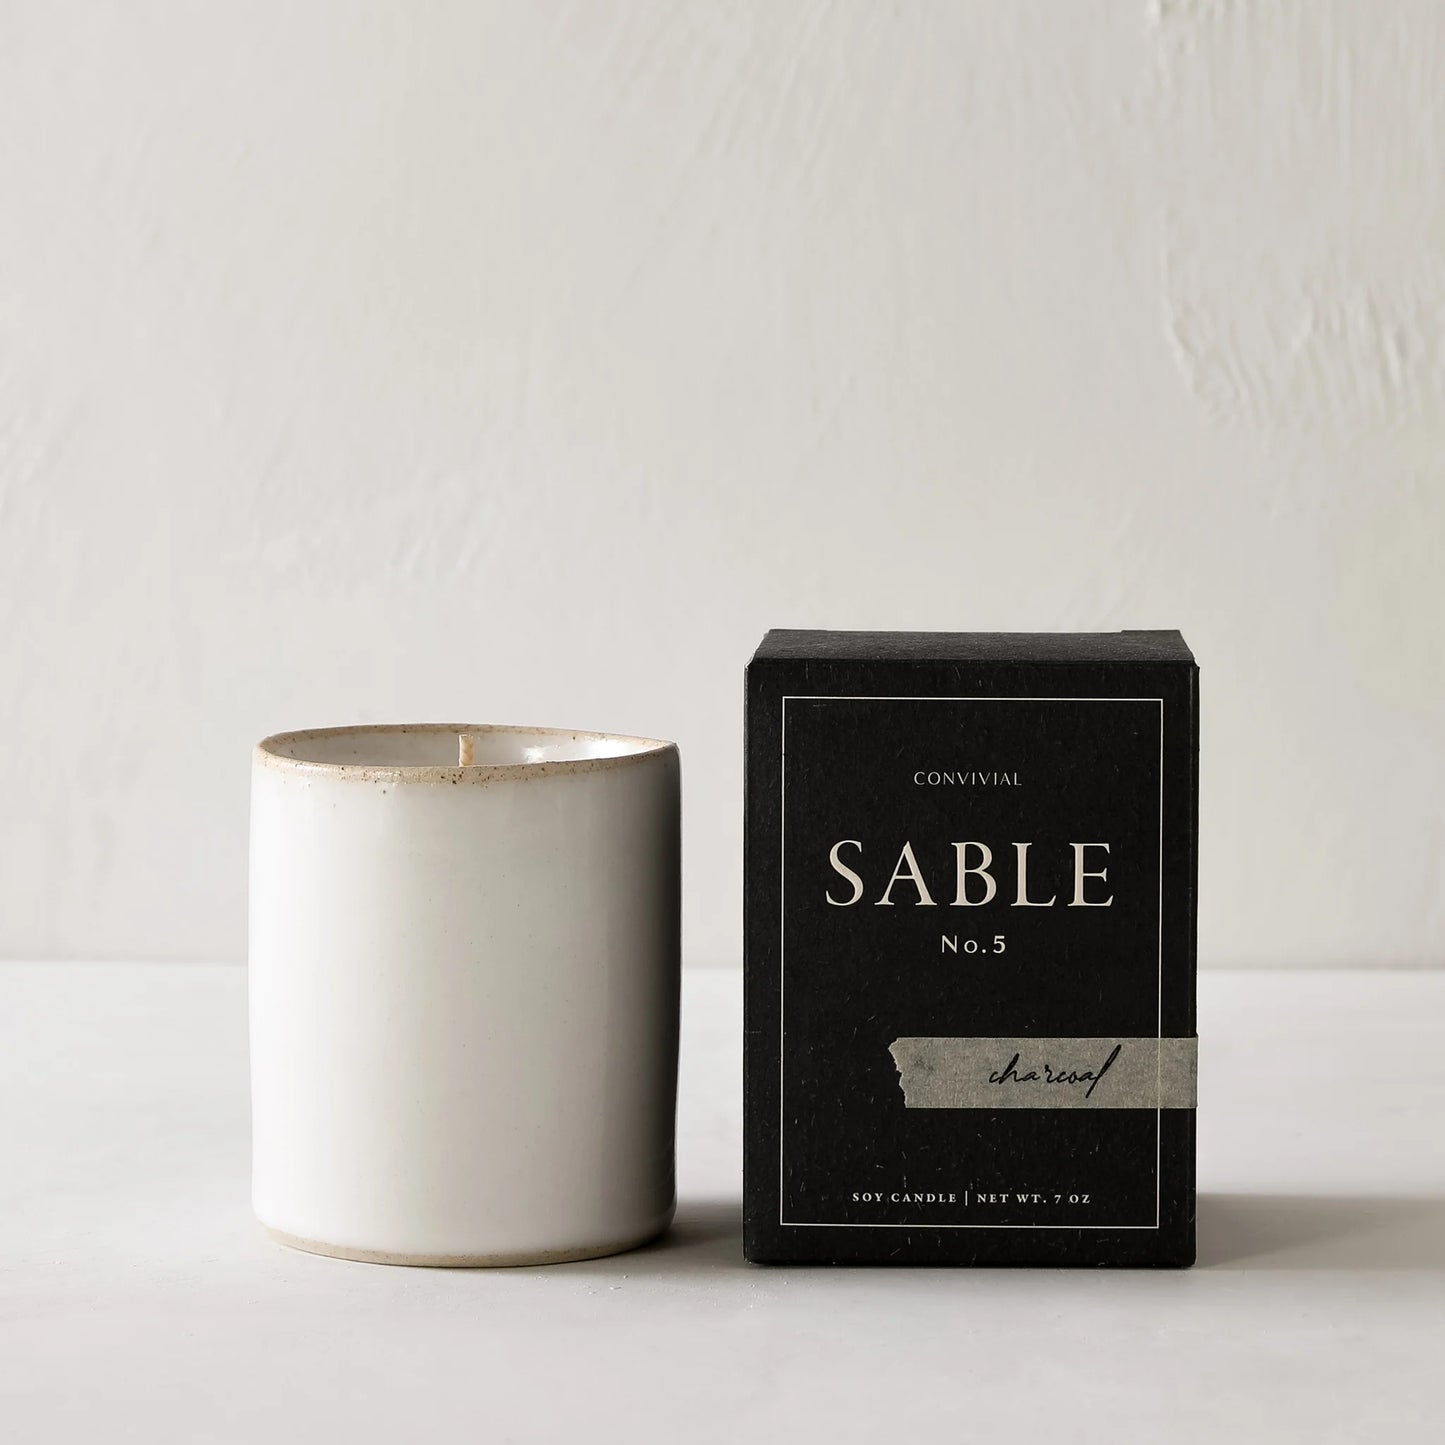 Sable No. 5 Charcoal Scented Soy Candle